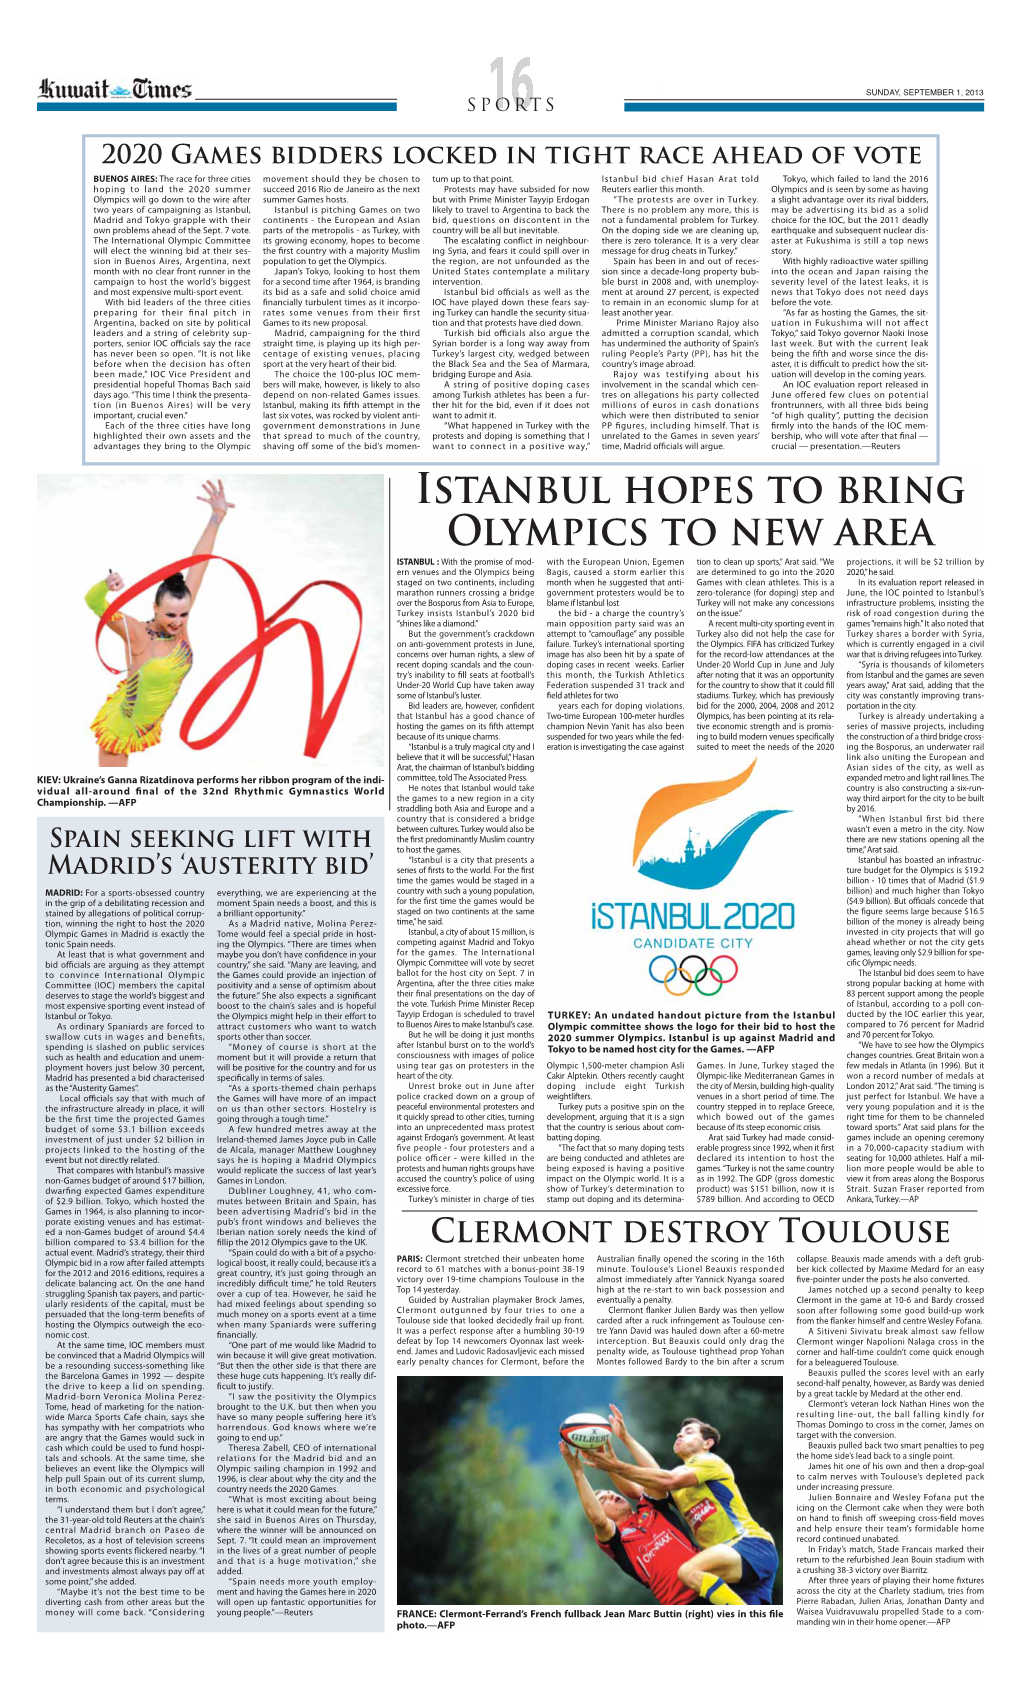 Istanbul Hopes to Bring Olympics to New Area